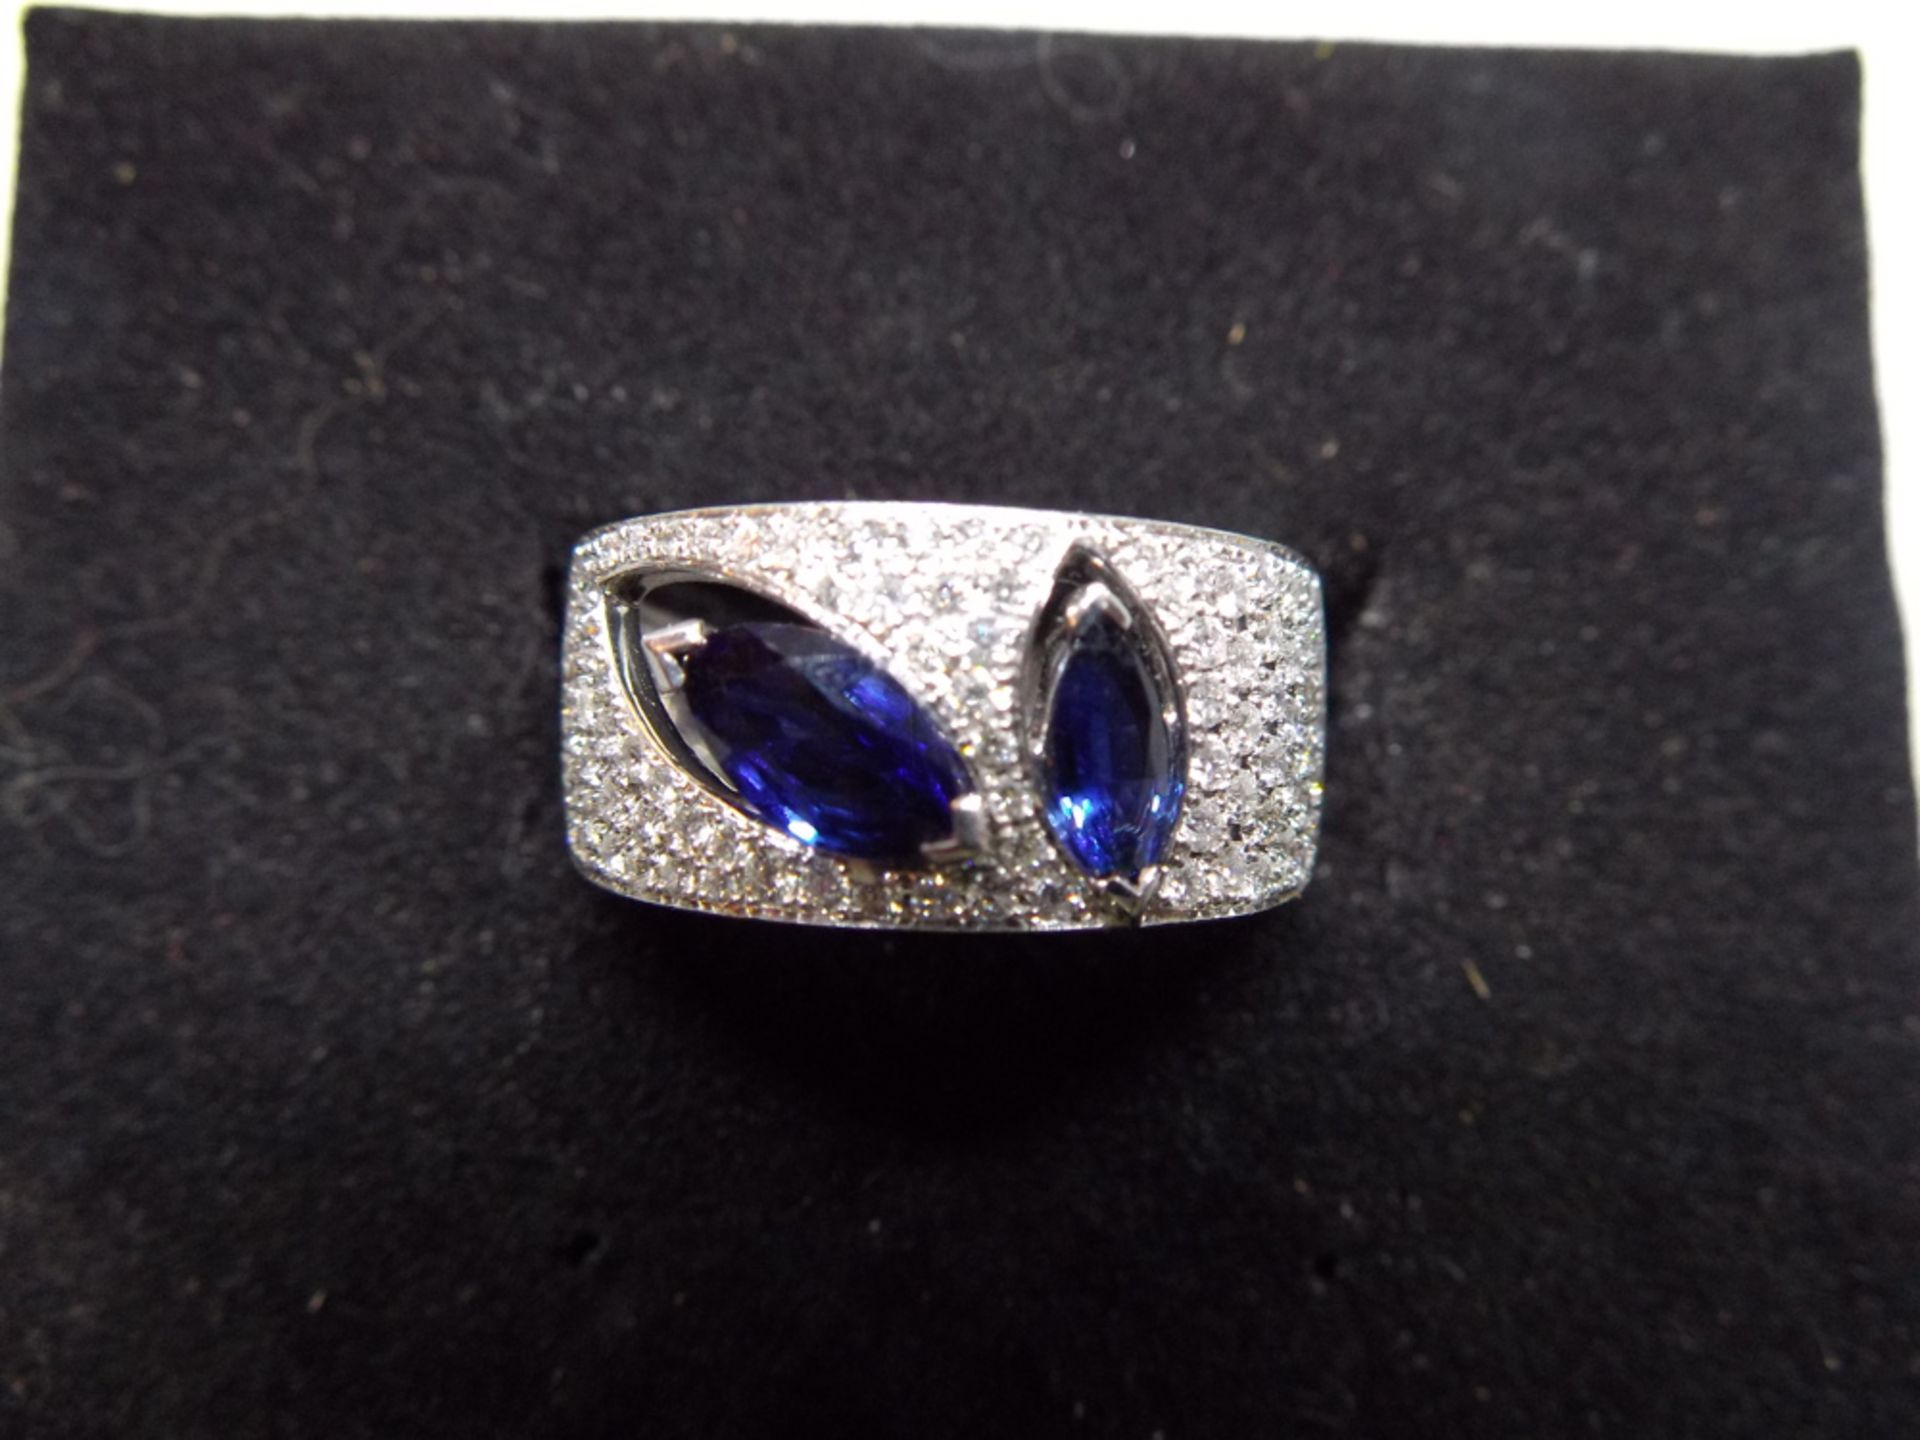 18CT White Gold and Sapphire ring